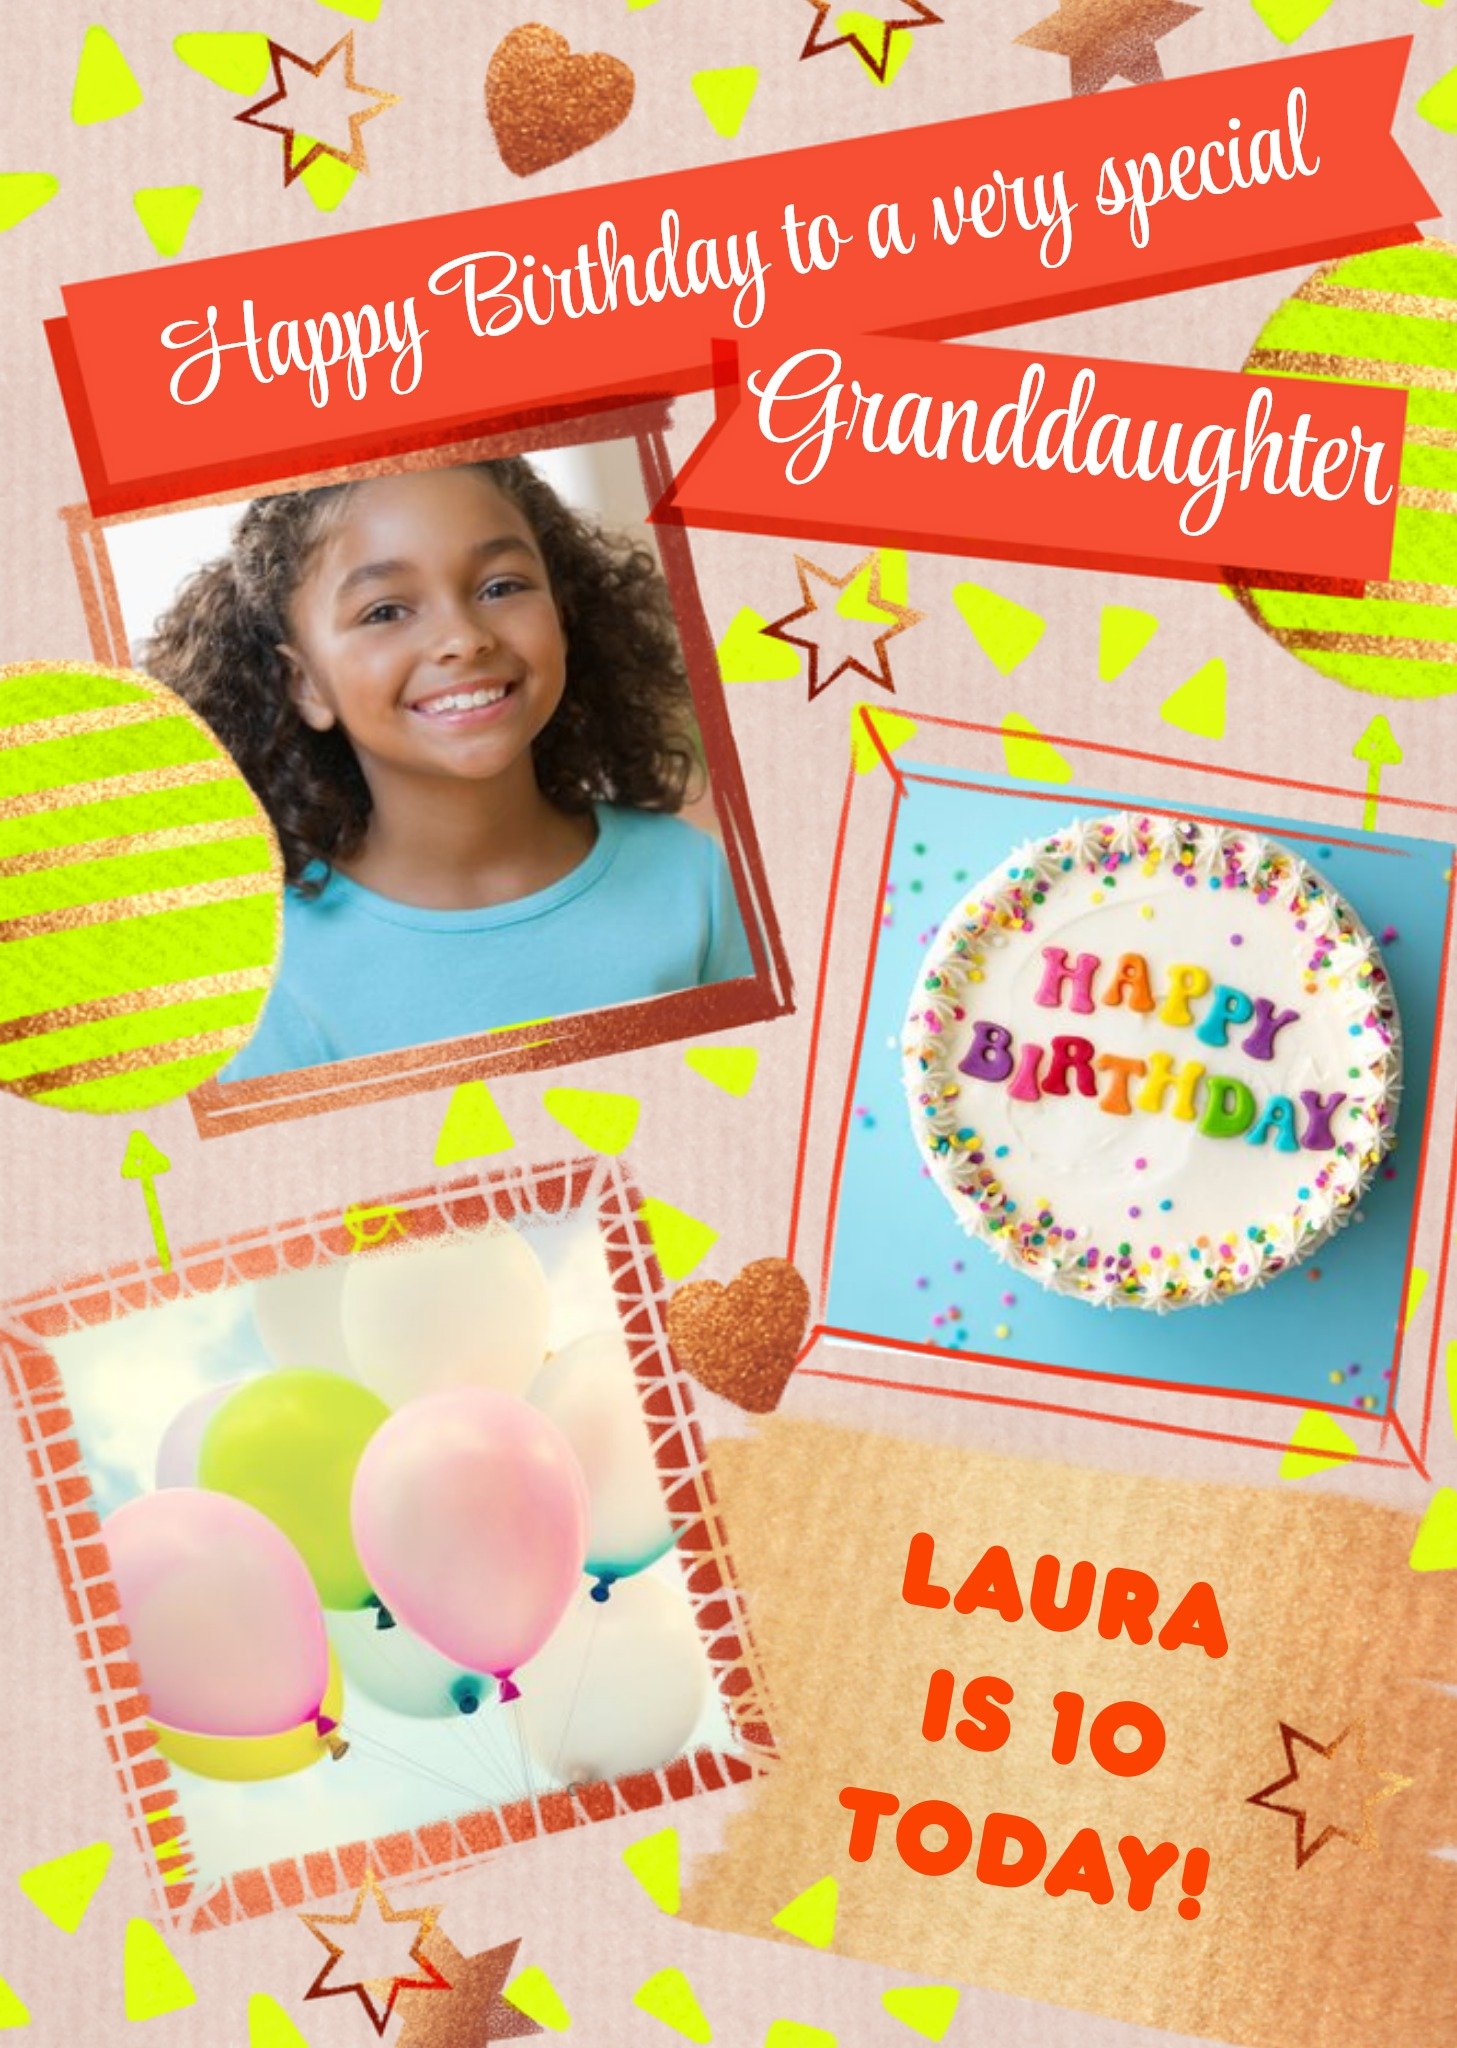 Moonpig To A Very Special Granddaughter Photo Upload Birthday Card Ecard